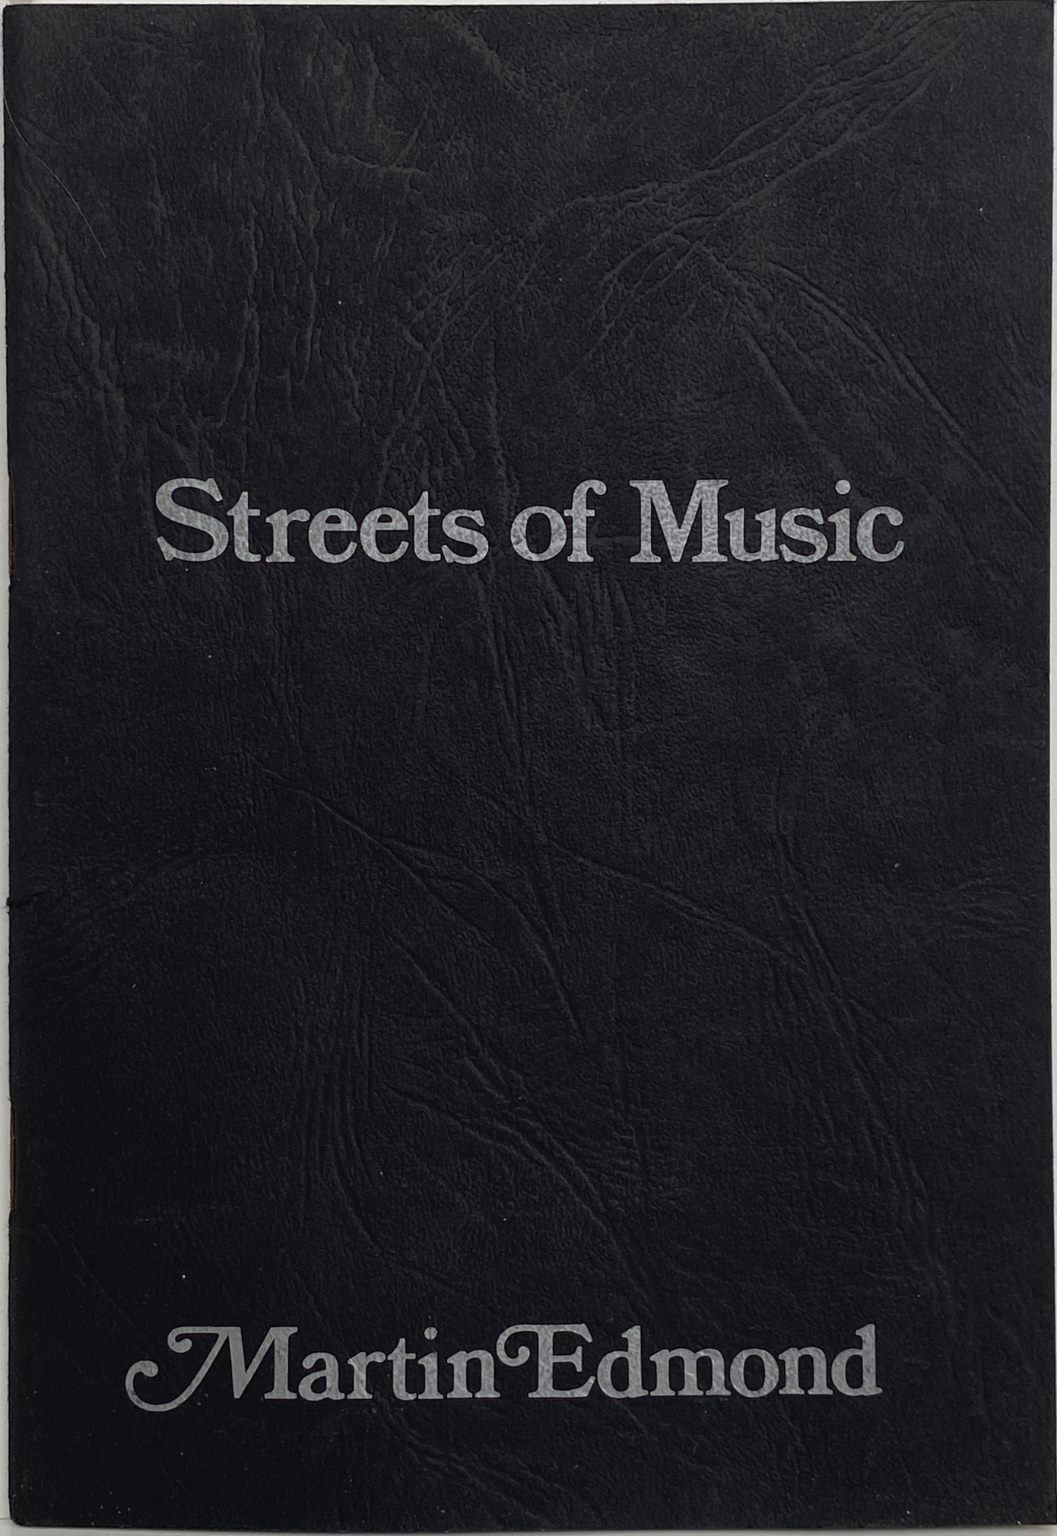 STREETS OF MUSIC